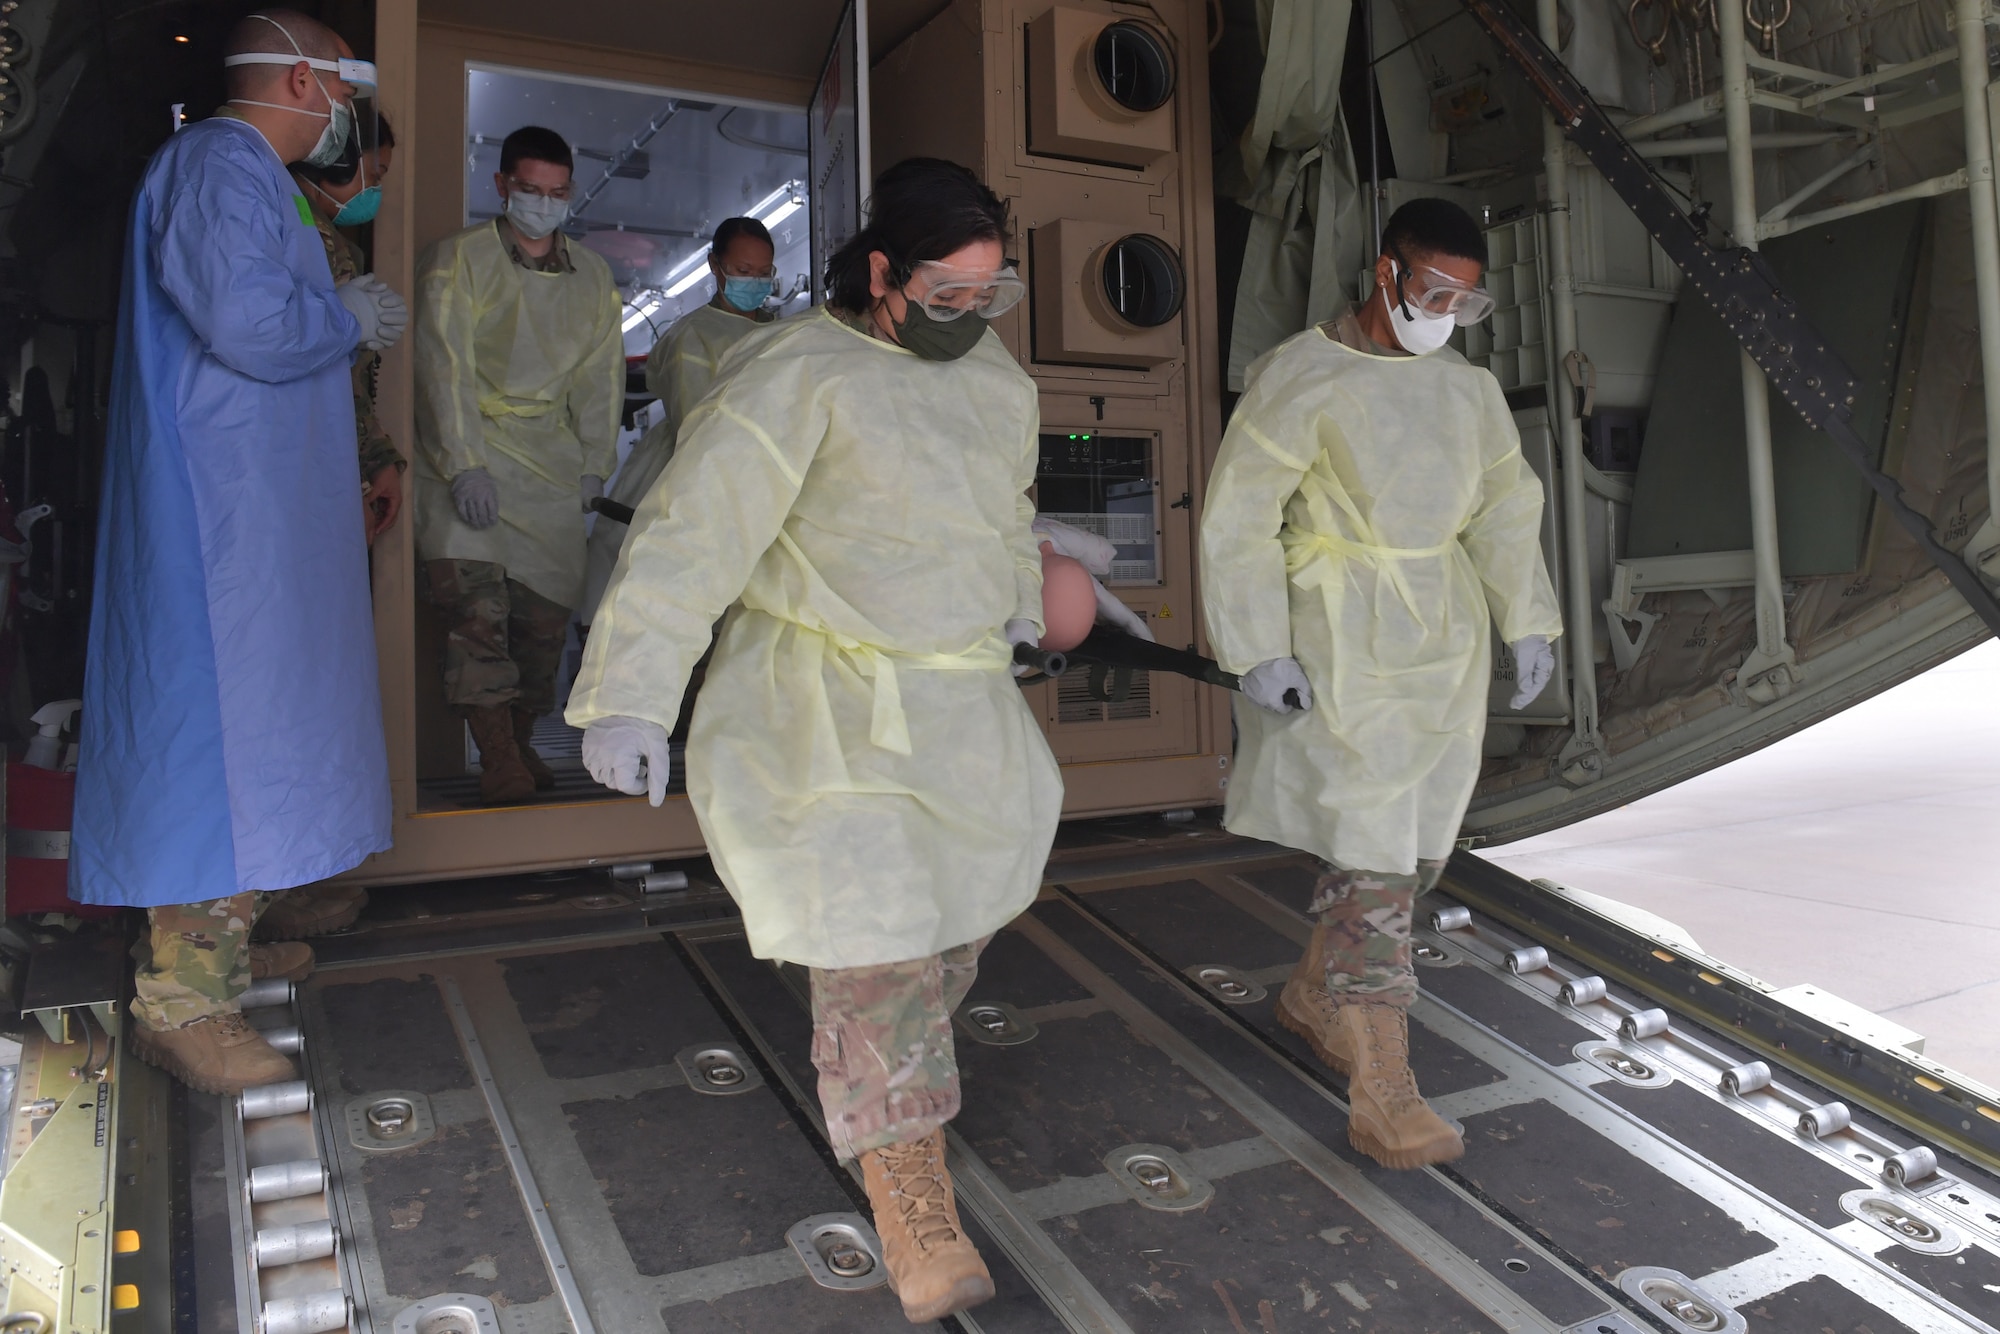 U.S. Air Force Airmen assigned to the 86th Medical Group and 86th Aeromedical Evacuation Squadron carry a simulated COVID-19 patient off of a C-130J Super Hercules aircraft at Ramstein Air Base, Germany, Dec. 18, 2020. The simulated patient was transported within a Negatively Pressurized Conex-Lite aboard the aircraft during an 86th AES training. The NPC-L is a smaller version of the Negatively Pressurized Conex, an isolated containment chamber intended to transport individuals with infectious diseases like COVID-19. (U.S. Air Force photo by Senior Airman John R. Wright)